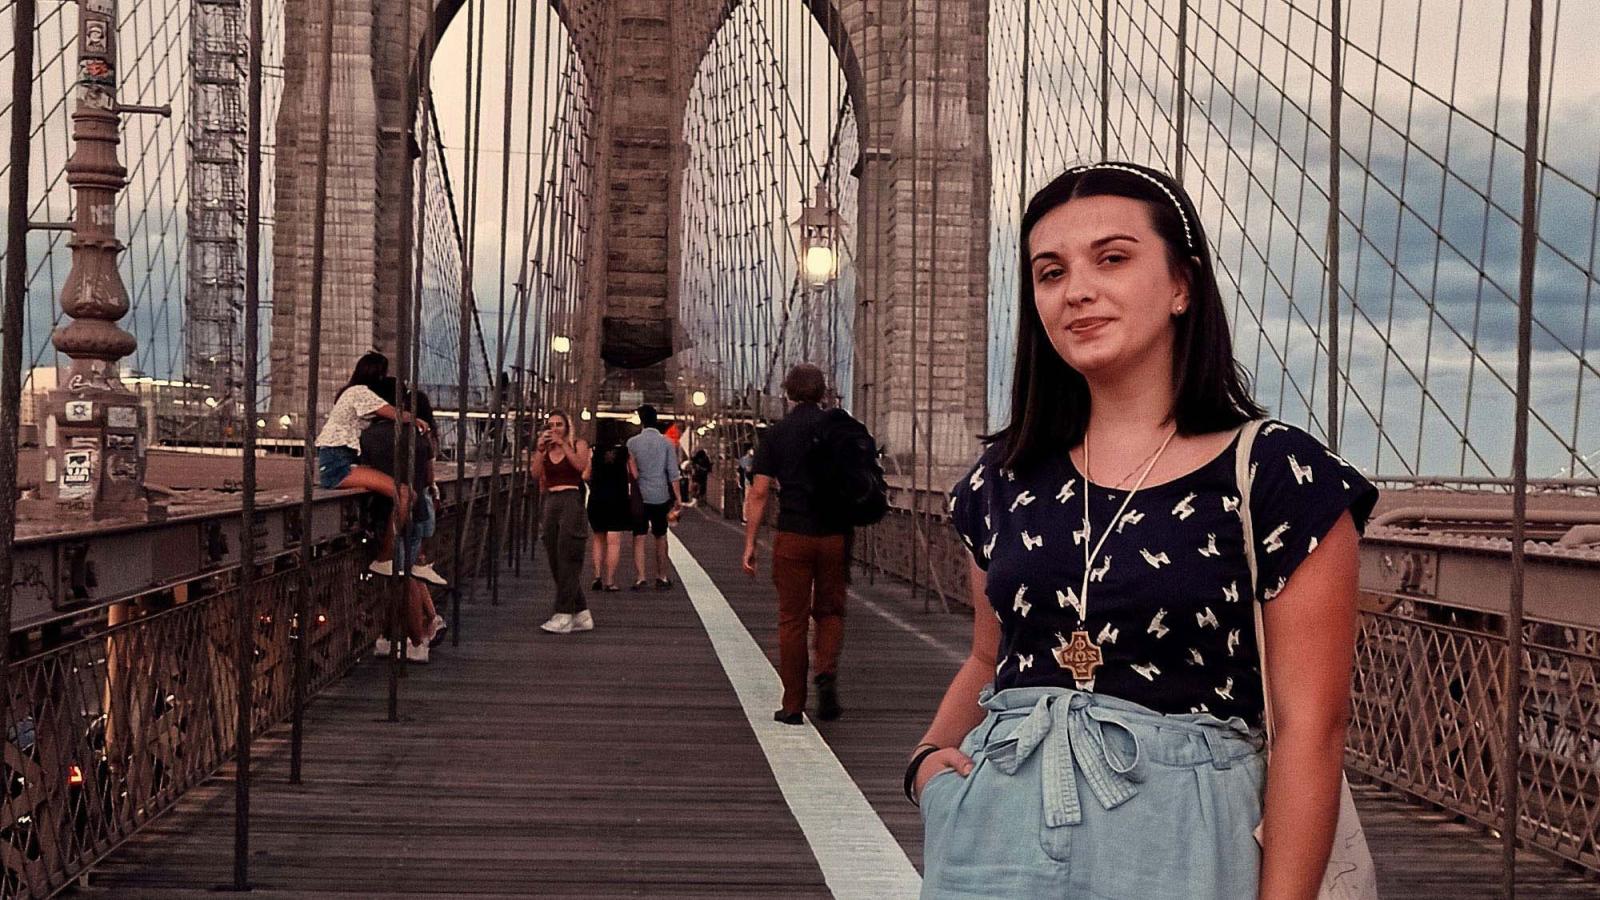 Julia Sroczy stands and smiles on a bridge in New York City